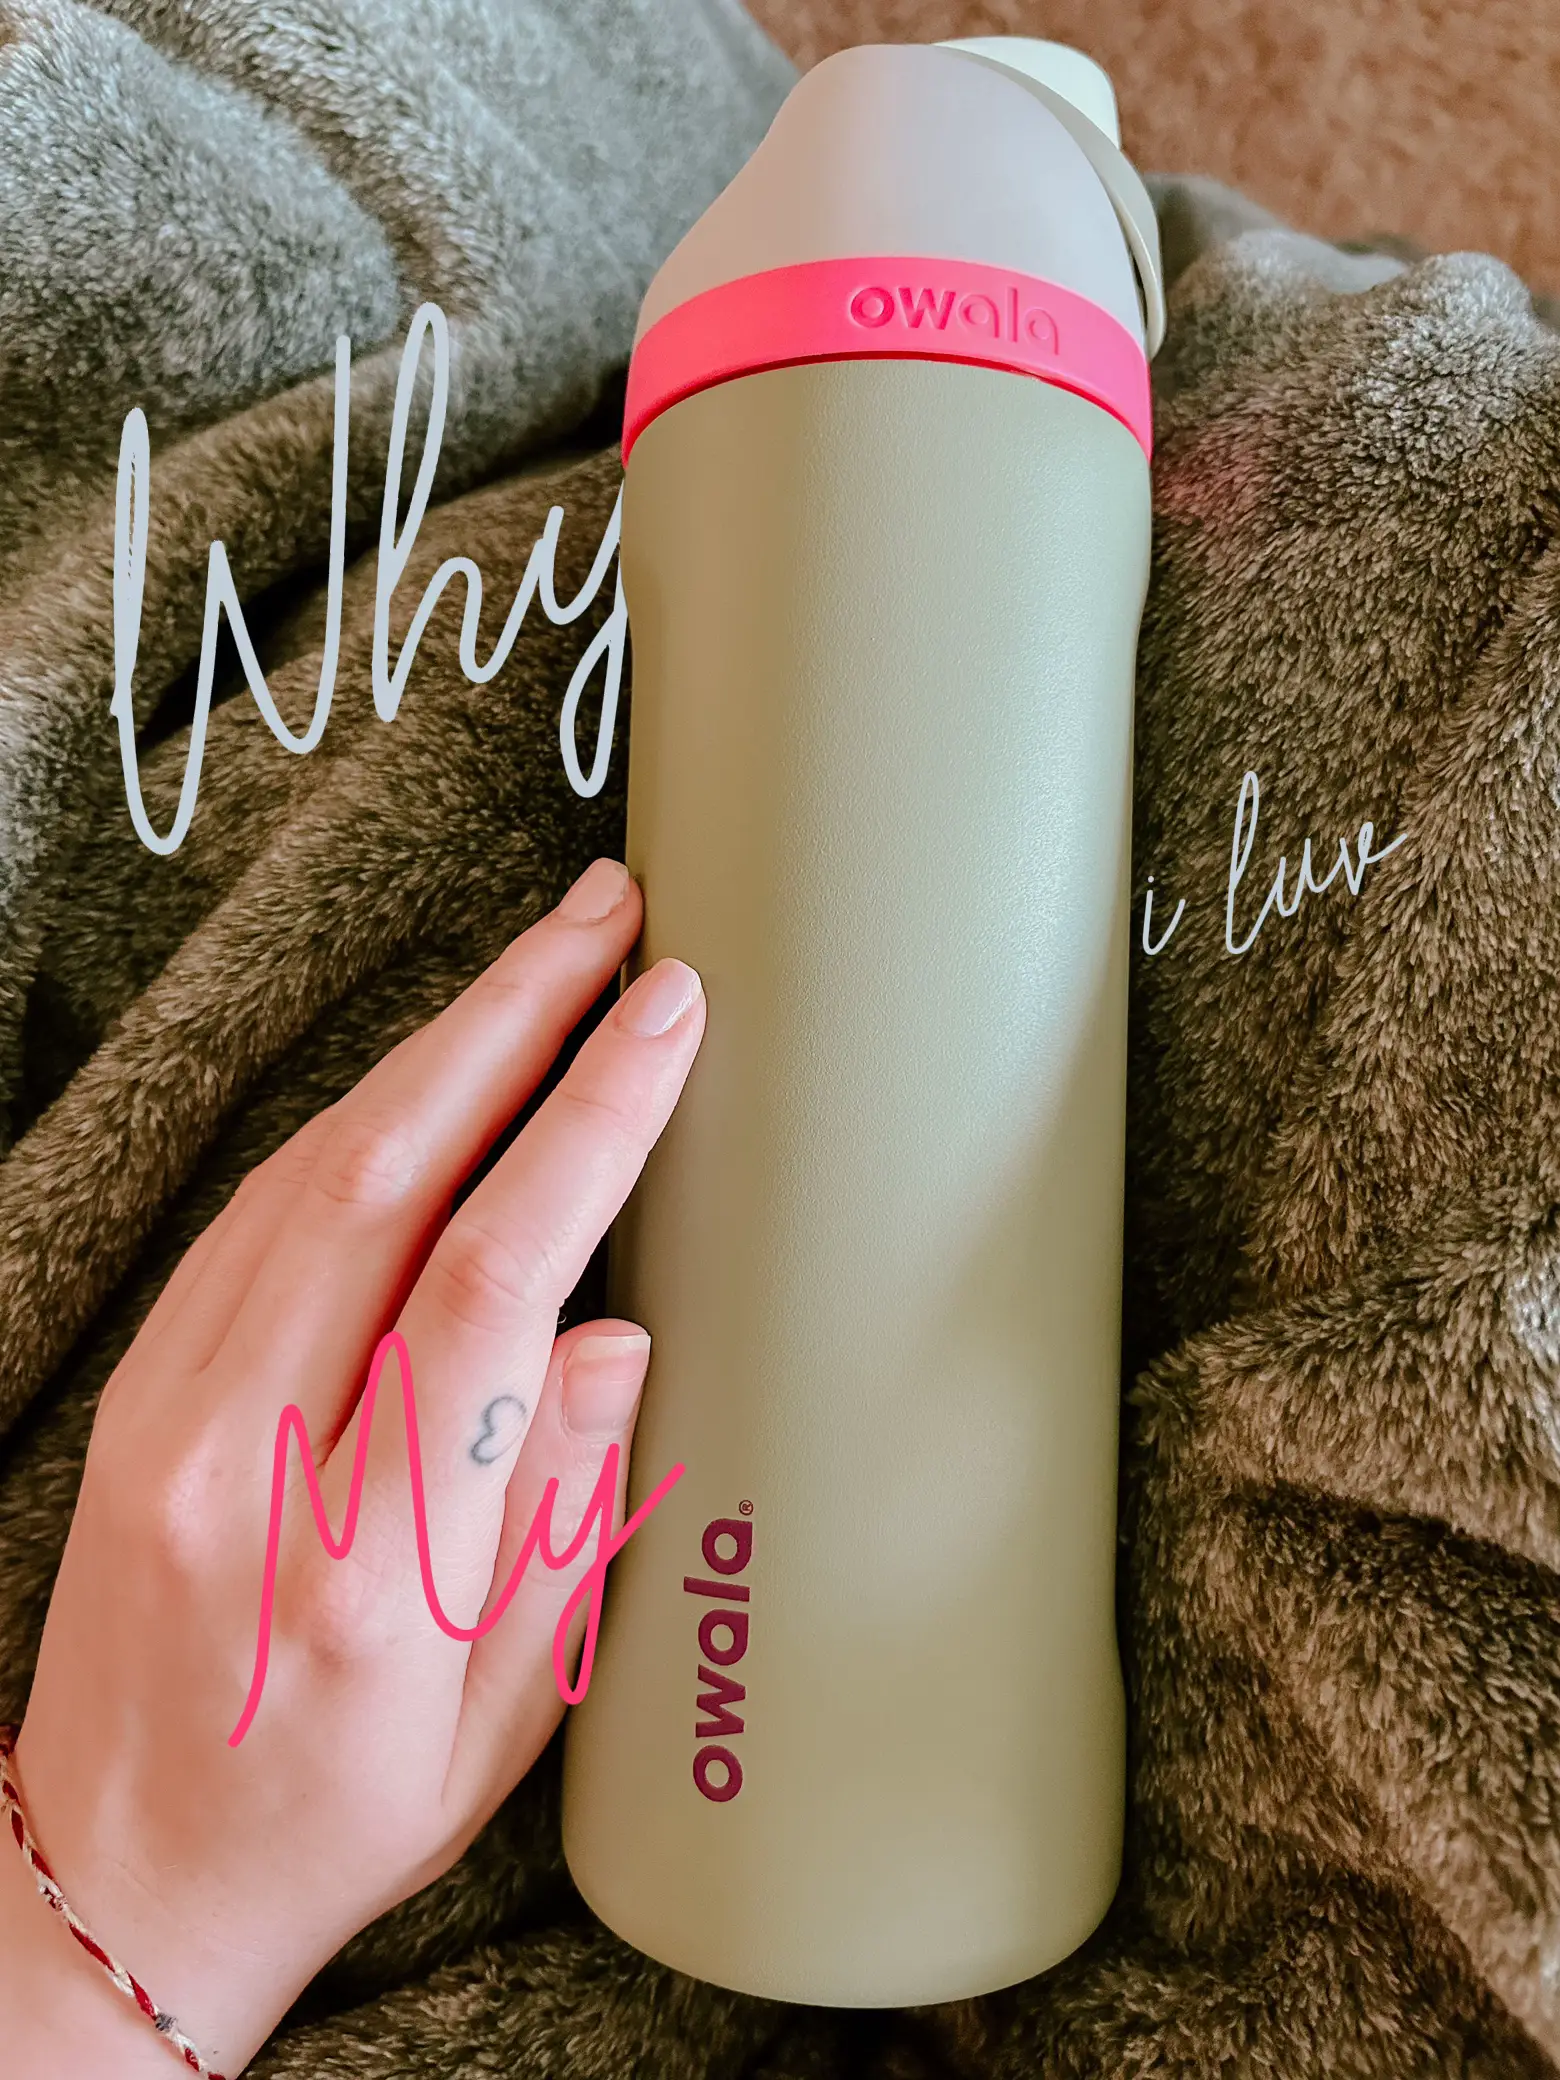 Why I use the OWALA tumbler, Gallery posted by Katelyn Beach